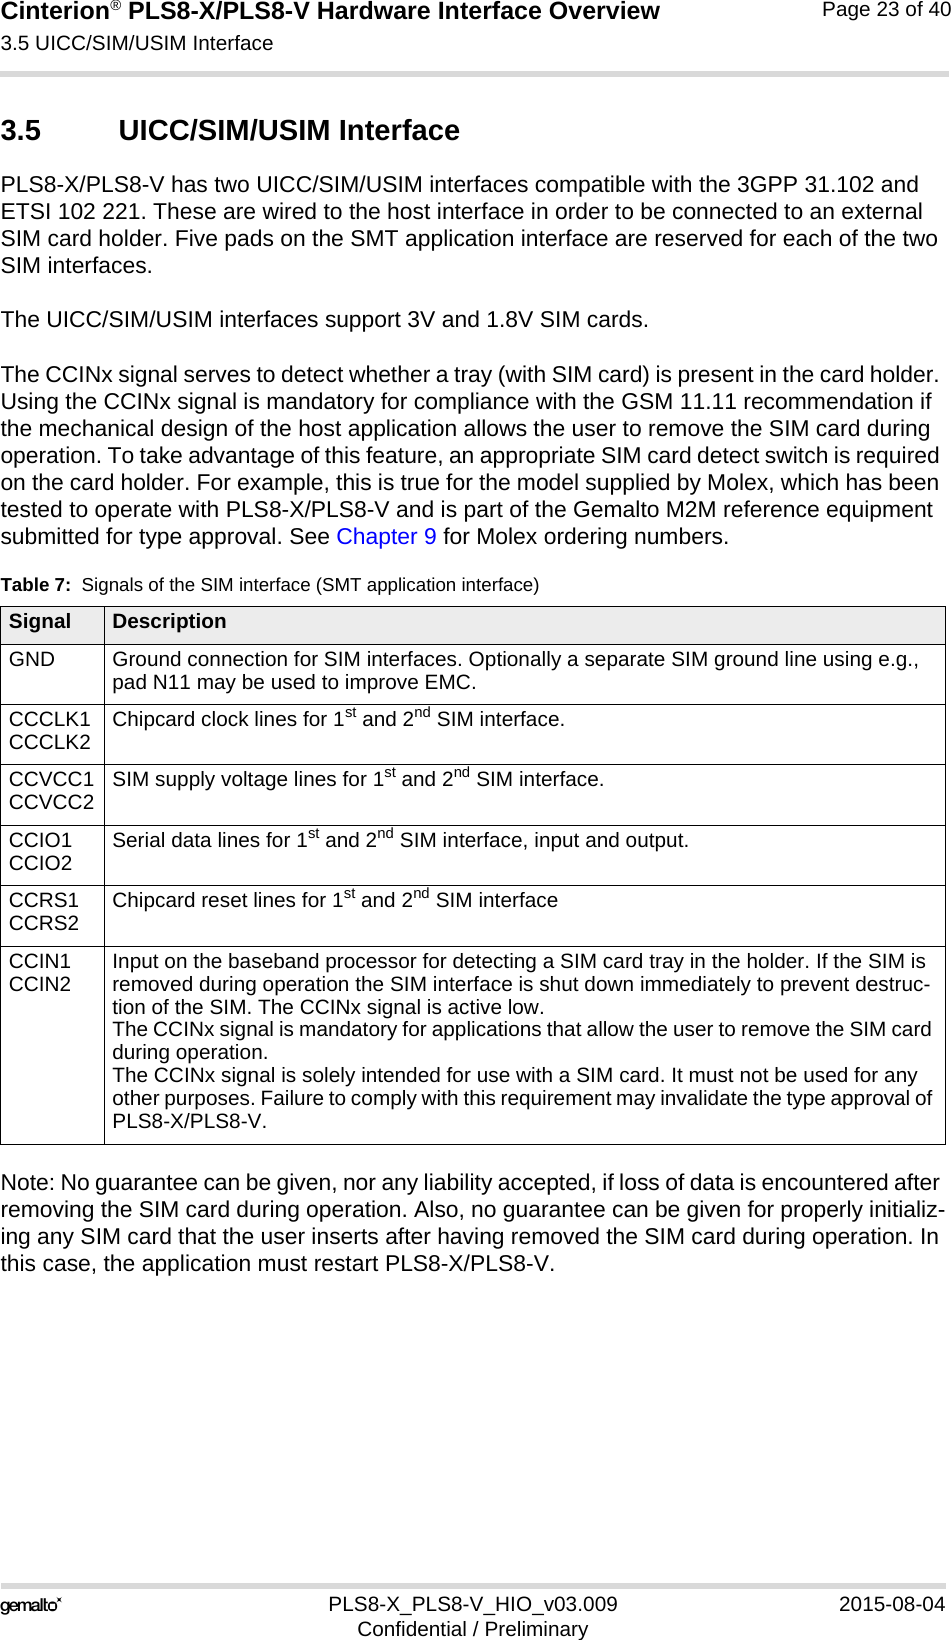 Cinterion® PLS8-X/PLS8-V Hardware Interface Overview3.5 UICC/SIM/USIM Interface26PLS8-X_PLS8-V_HIO_v03.009 2015-08-04Confidential / PreliminaryPage 23 of 403.5 UICC/SIM/USIM InterfacePLS8-X/PLS8-V has two UICC/SIM/USIM interfaces compatible with the 3GPP 31.102 and ETSI 102 221. These are wired to the host interface in order to be connected to an external SIM card holder. Five pads on the SMT application interface are reserved for each of the two SIM interfaces. The UICC/SIM/USIM interfaces support 3V and 1.8V SIM cards. The CCINx signal serves to detect whether a tray (with SIM card) is present in the card holder. Using the CCINx signal is mandatory for compliance with the GSM 11.11 recommendation if the mechanical design of the host application allows the user to remove the SIM card during operation. To take advantage of this feature, an appropriate SIM card detect switch is required on the card holder. For example, this is true for the model supplied by Molex, which has been tested to operate with PLS8-X/PLS8-V and is part of the Gemalto M2M reference equipment submitted for type approval. See Chapter 9 for Molex ordering numbers.Note: No guarantee can be given, nor any liability accepted, if loss of data is encountered after removing the SIM card during operation. Also, no guarantee can be given for properly initializ-ing any SIM card that the user inserts after having removed the SIM card during operation. In this case, the application must restart PLS8-X/PLS8-V.Table 7:  Signals of the SIM interface (SMT application interface)Signal DescriptionGND Ground connection for SIM interfaces. Optionally a separate SIM ground line using e.g., pad N11 may be used to improve EMC.CCCLK1CCCLK2 Chipcard clock lines for 1st and 2nd SIM interface.CCVCC1CCVCC2 SIM supply voltage lines for 1st and 2nd SIM interface.CCIO1CCIO2 Serial data lines for 1st and 2nd SIM interface, input and output.CCRS1CCRS2 Chipcard reset lines for 1st and 2nd SIM interfaceCCIN1CCIN2 Input on the baseband processor for detecting a SIM card tray in the holder. If the SIM is removed during operation the SIM interface is shut down immediately to prevent destruc-tion of the SIM. The CCINx signal is active low.The CCINx signal is mandatory for applications that allow the user to remove the SIM card during operation. The CCINx signal is solely intended for use with a SIM card. It must not be used for any other purposes. Failure to comply with this requirement may invalidate the type approval of PLS8-X/PLS8-V.